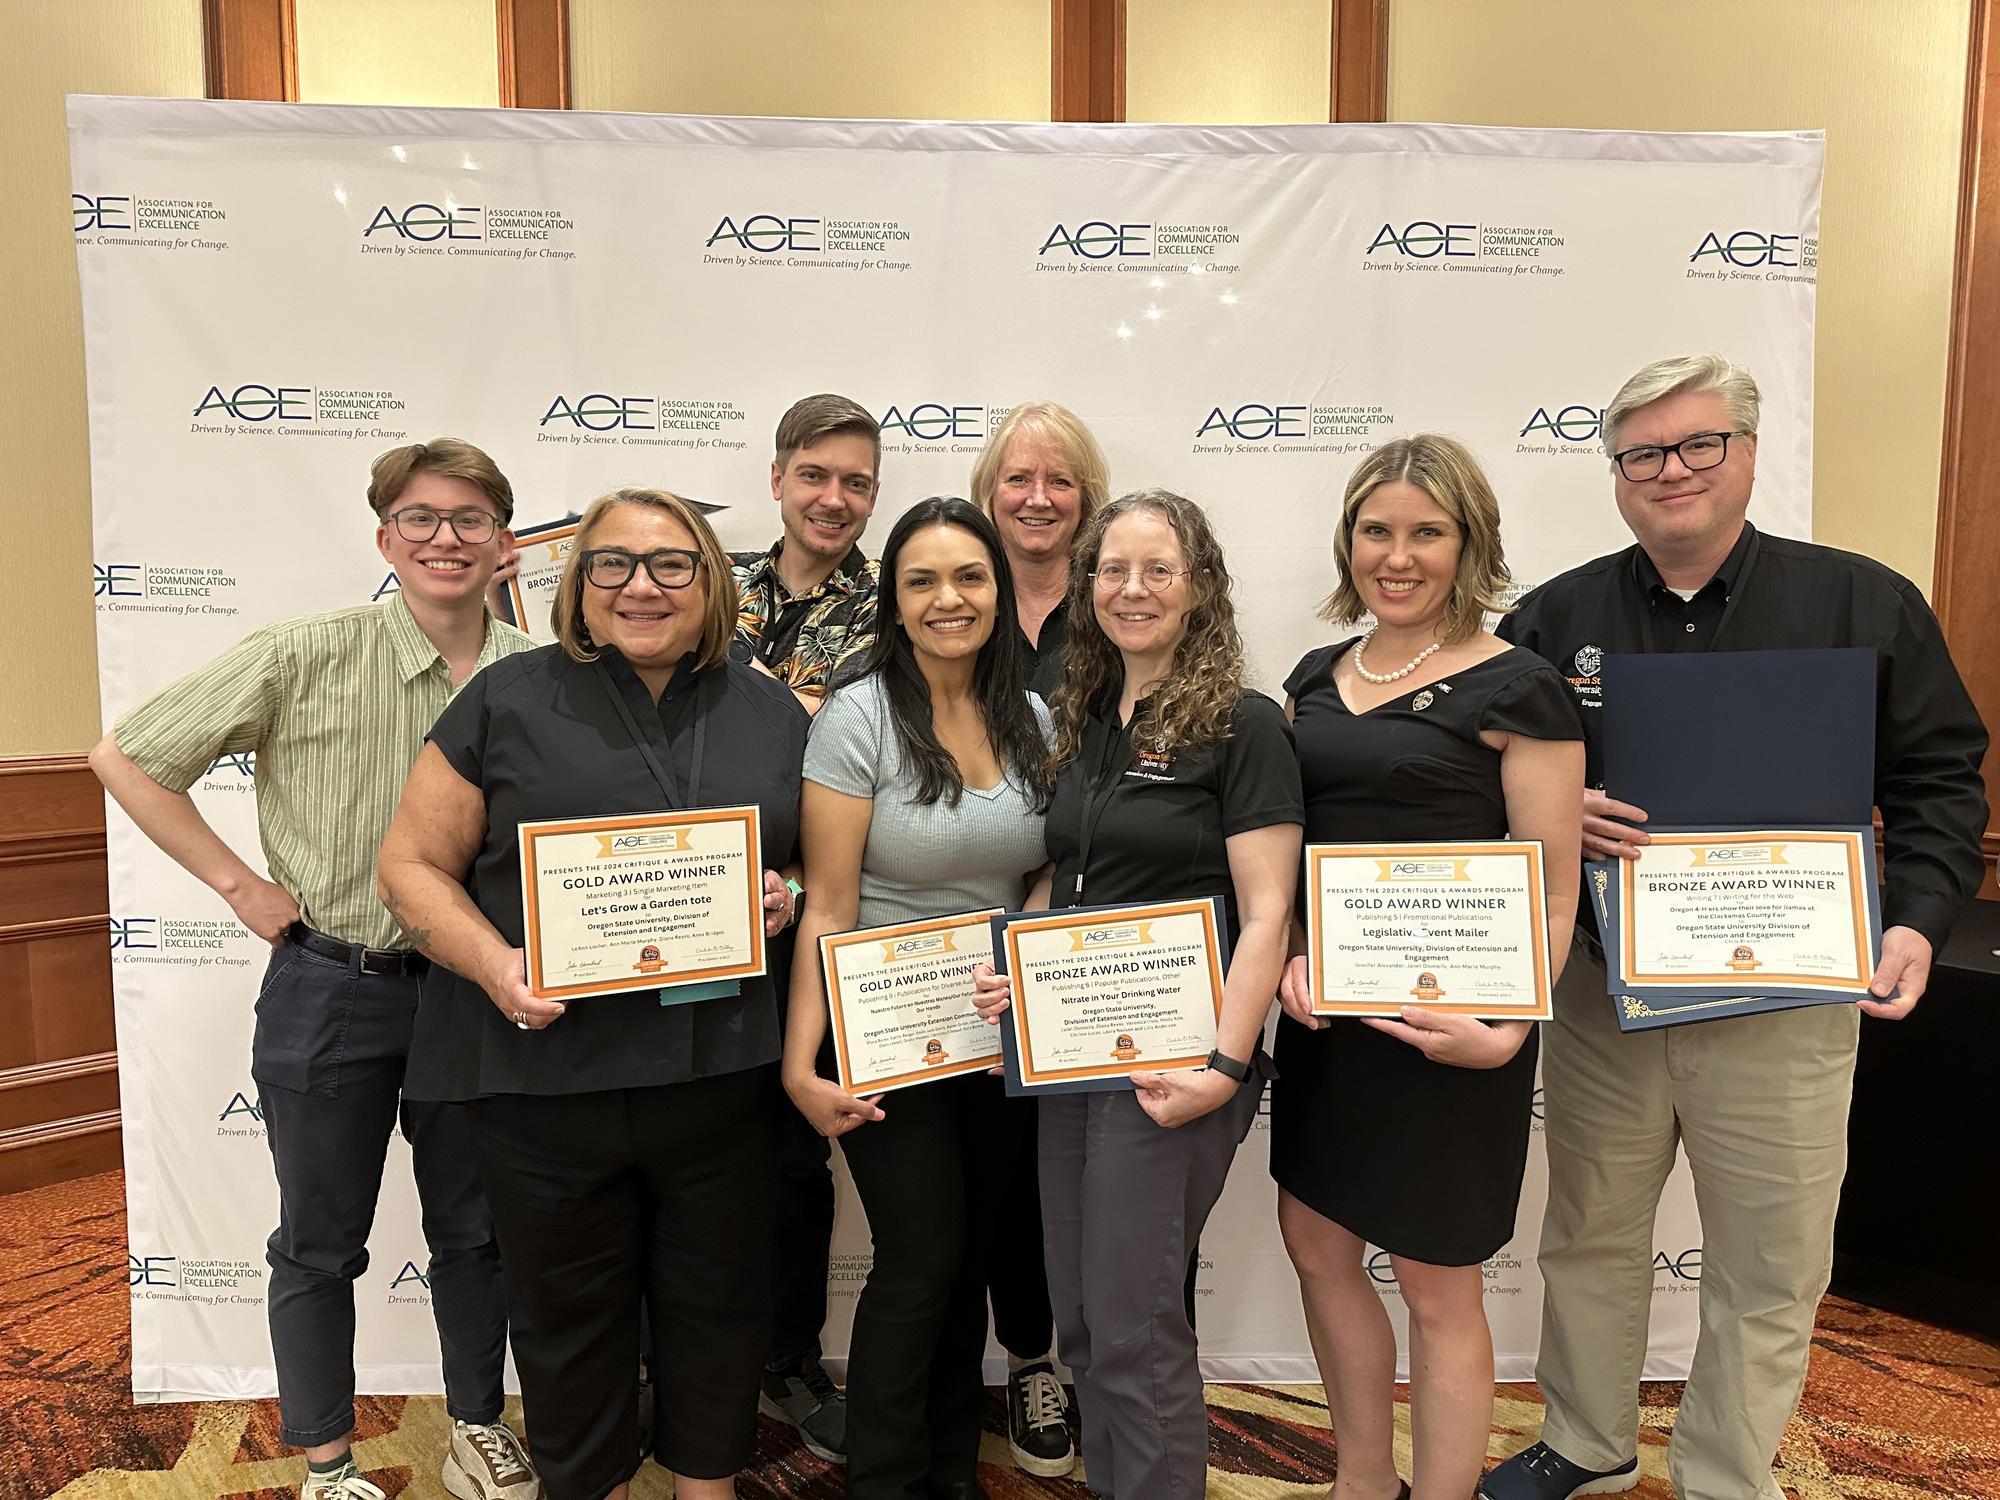 Members of the OSU Extension Communications office (from left) Henry Carnell, LeAnn Locher, Alan Dennis, Diana Reyes, Ann Marie Murphy, Janet Donnelly, Jennifer Alexander and Chris Branampose with awards at the ACE Conference in Salt Lake City.